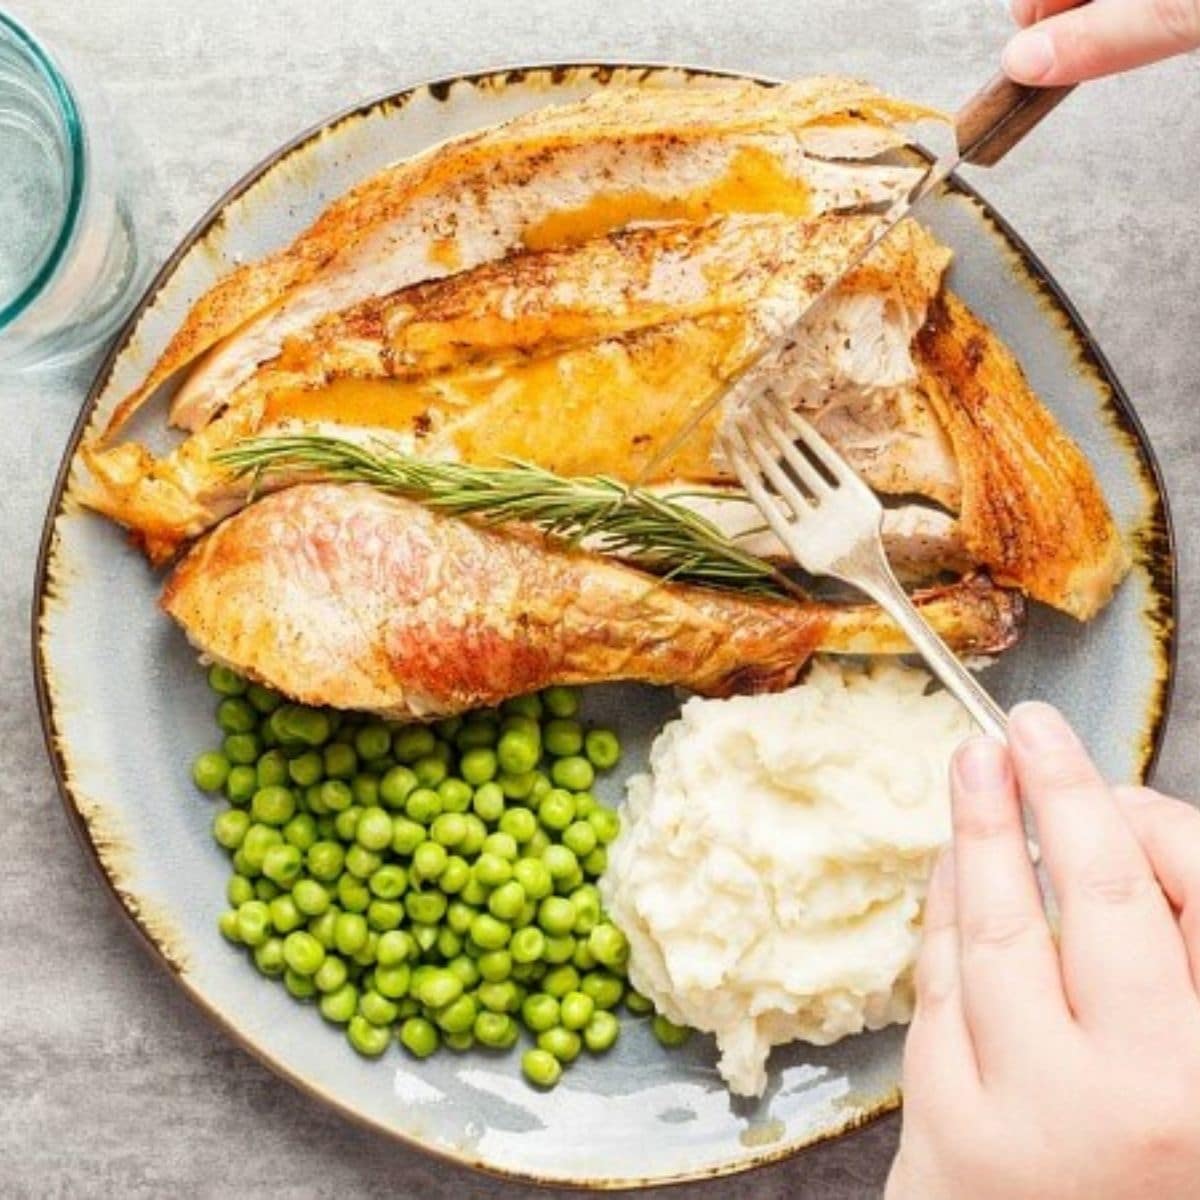 Oven patchock turkey on blue plate with peas, mashed potatoes, fork and knife held by hands